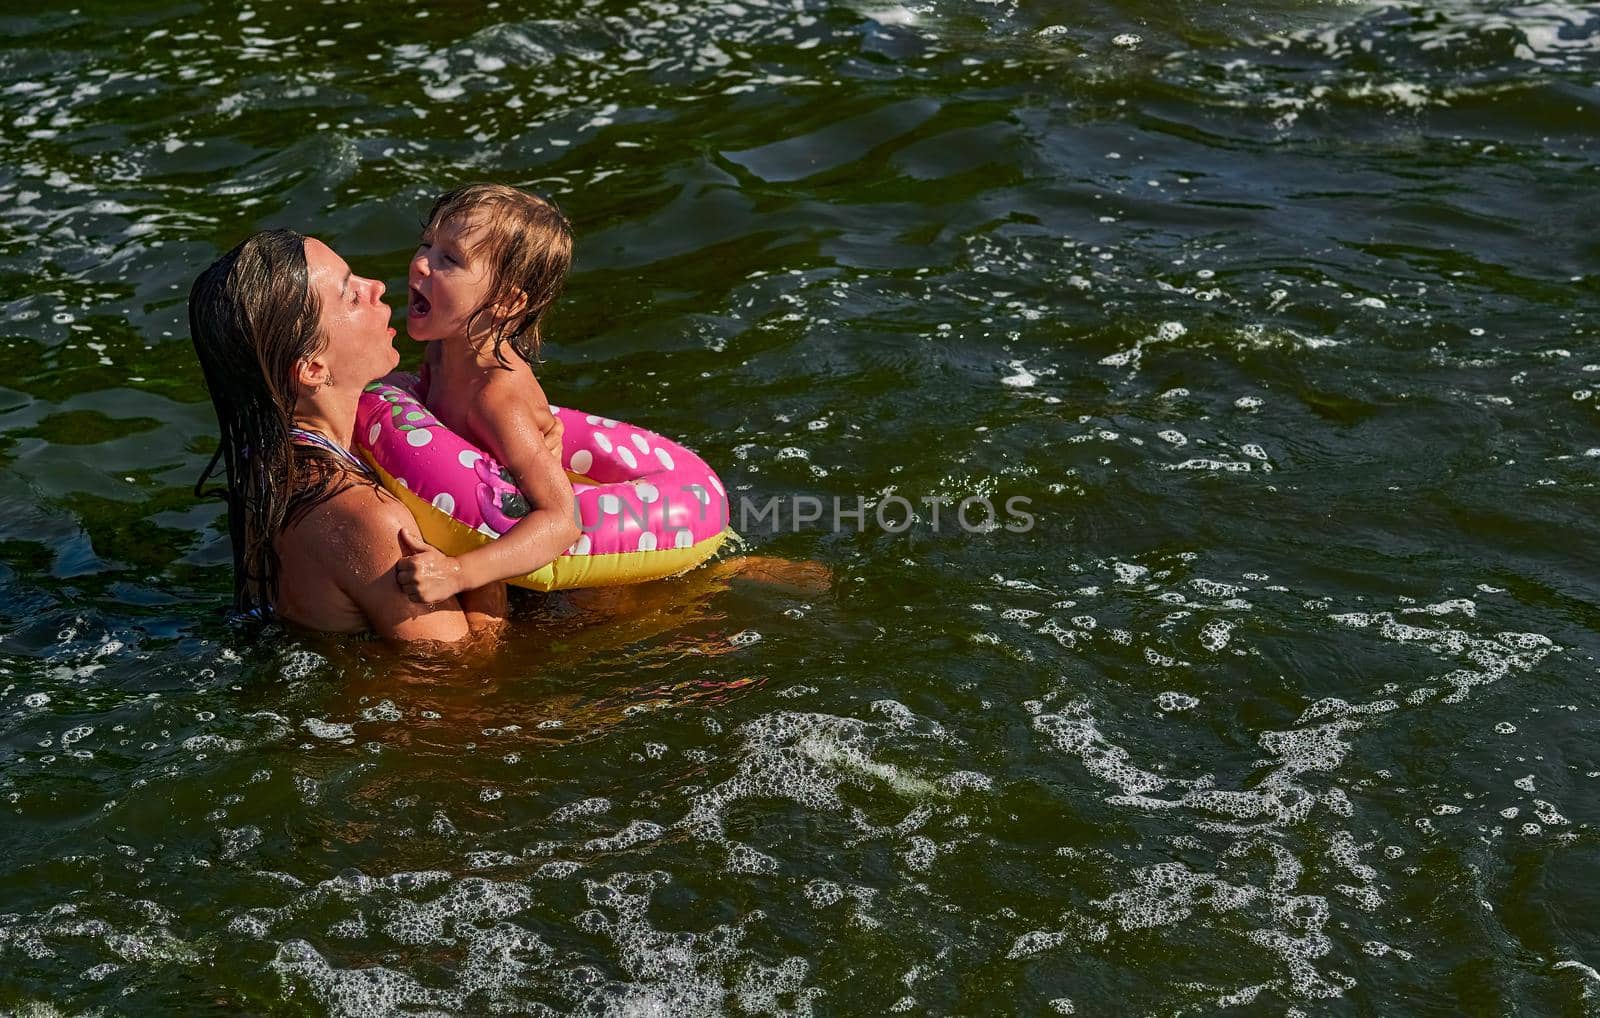 propel the body through water by using the limbs,by using fins, tail, or other bodily movement.Cute girl on a swimming circle bathes with her mother protecting her in the sea.